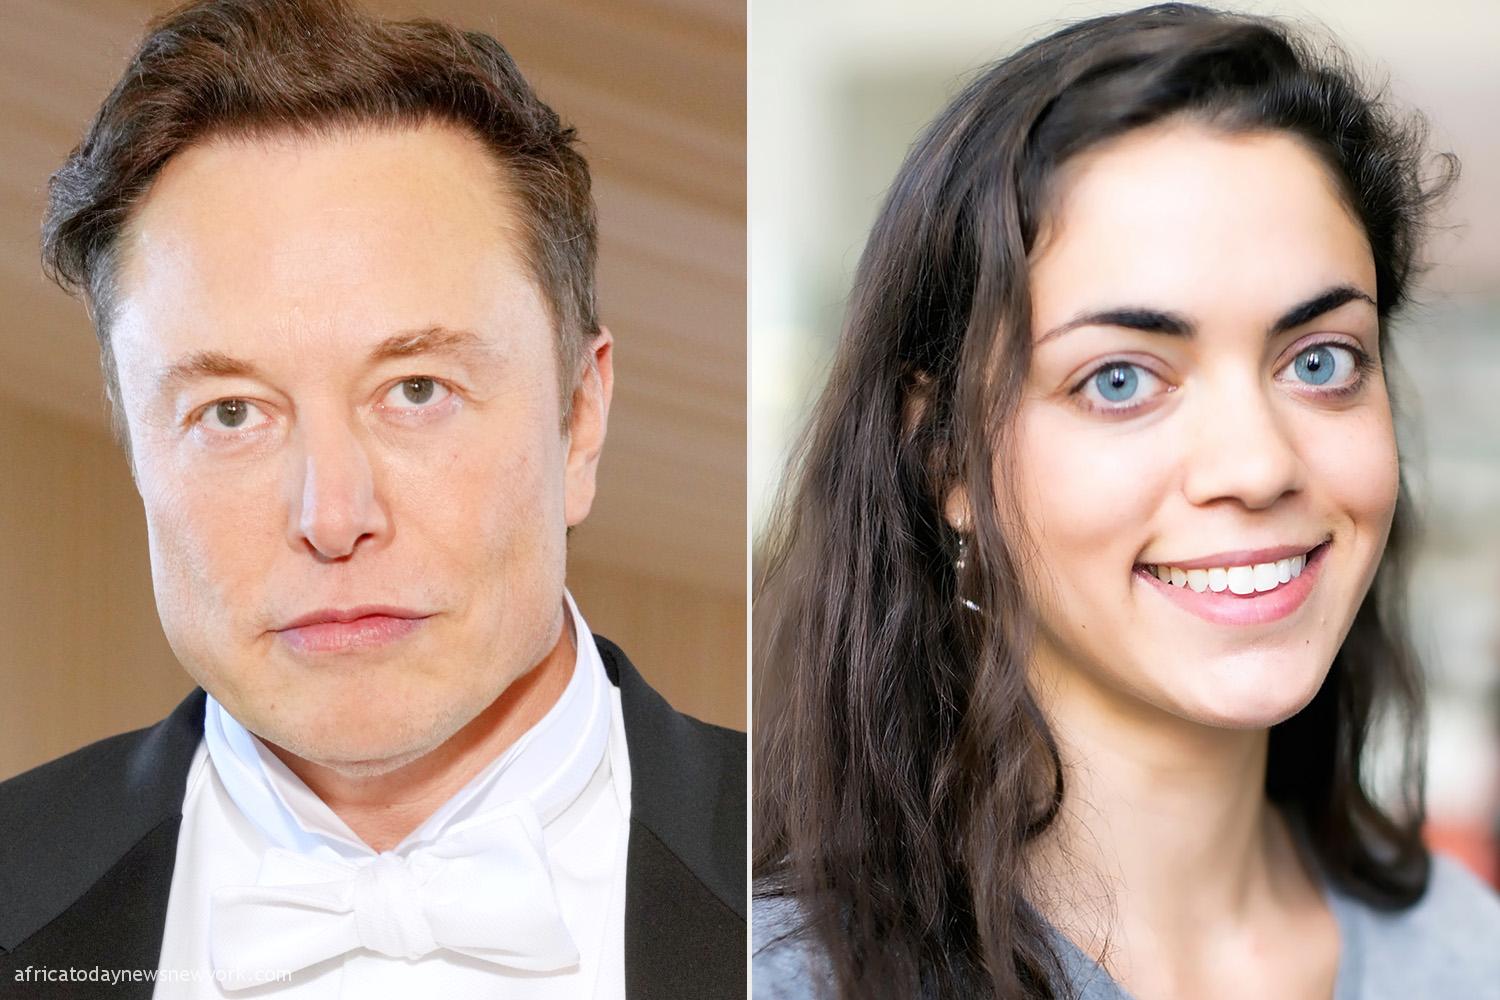 Elon Musk Revealed To Have Secretly Had Twins With His Worker